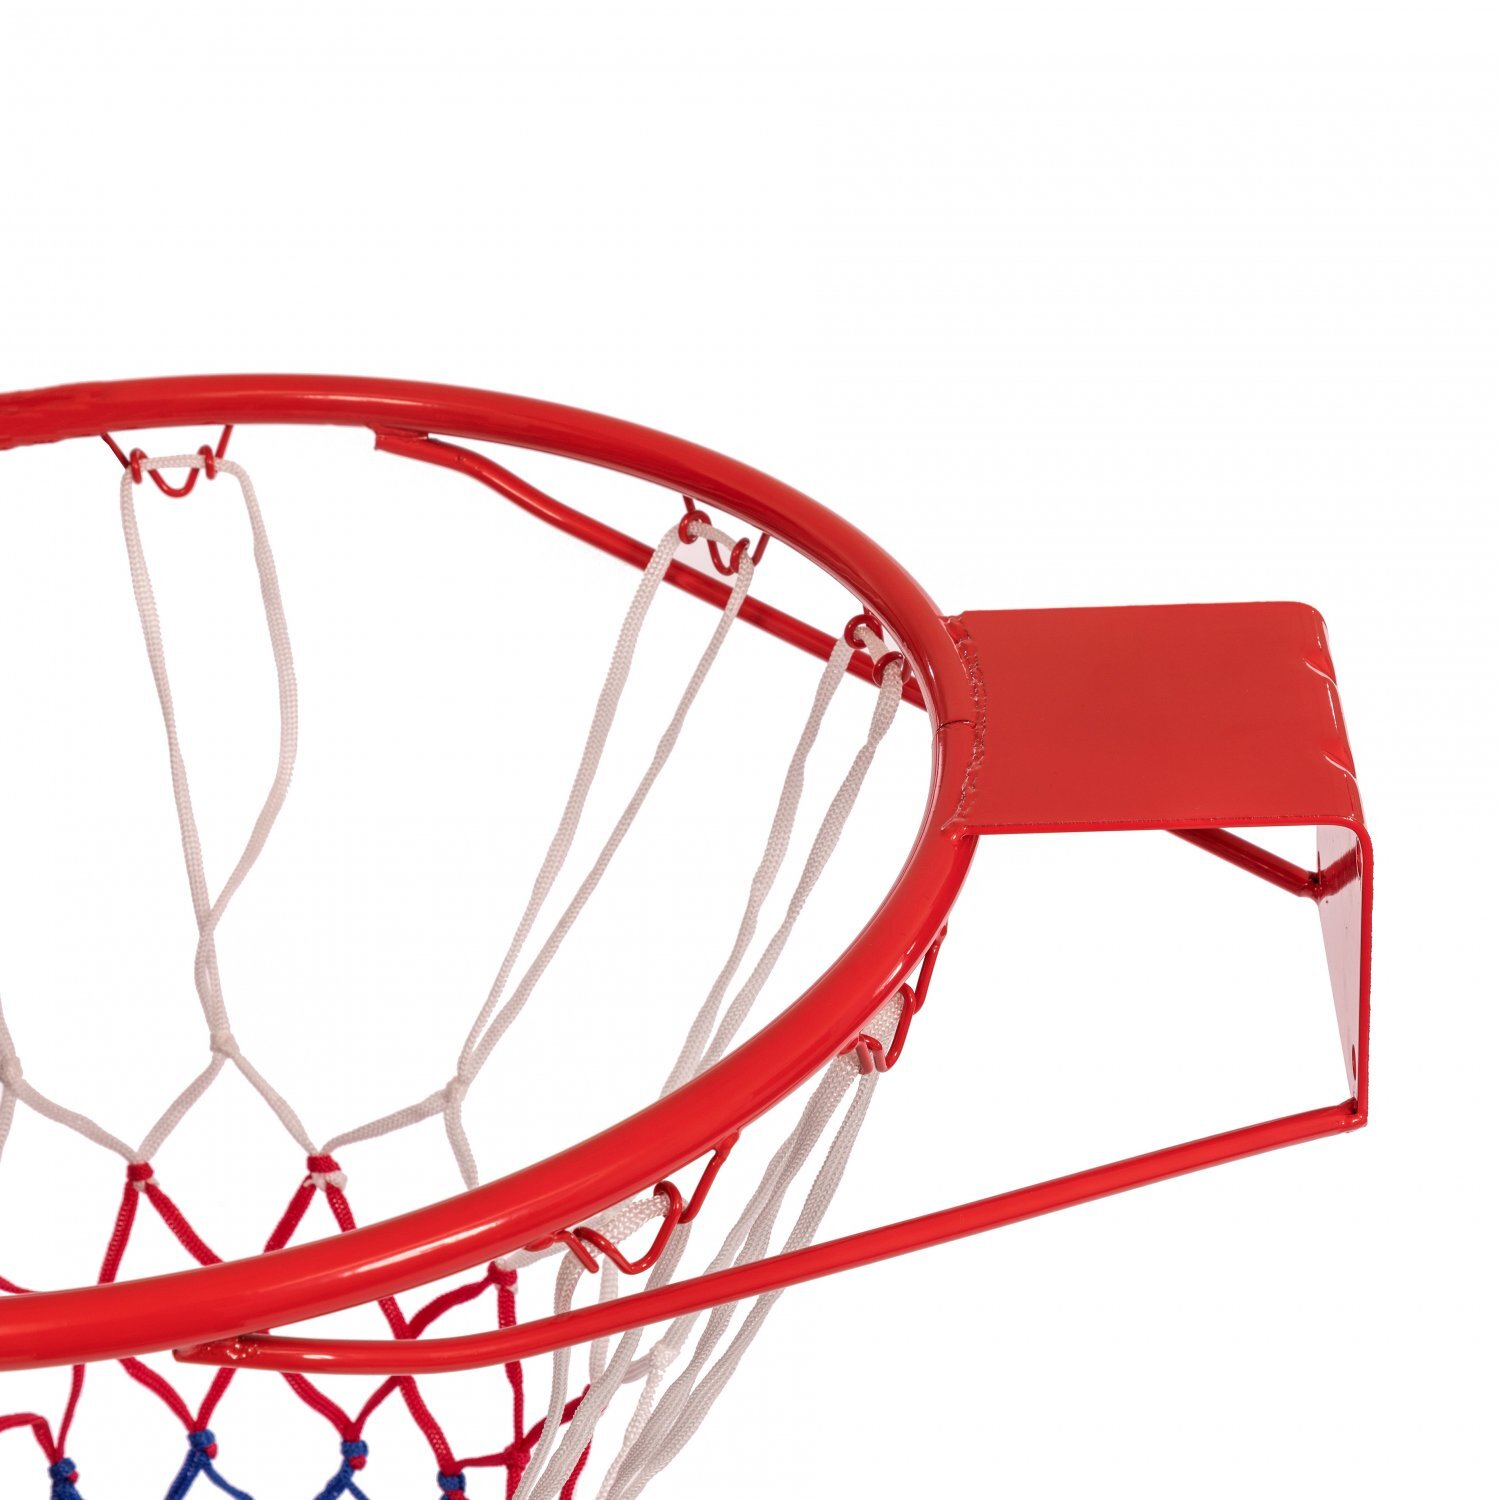 Wall-Mounted Full Size Goal Hoop Ring with Net and Fixtures for Outdoors Indoor Kids and Adult 32cm popular beautifully way atteryhui Basketball Hoop Net 